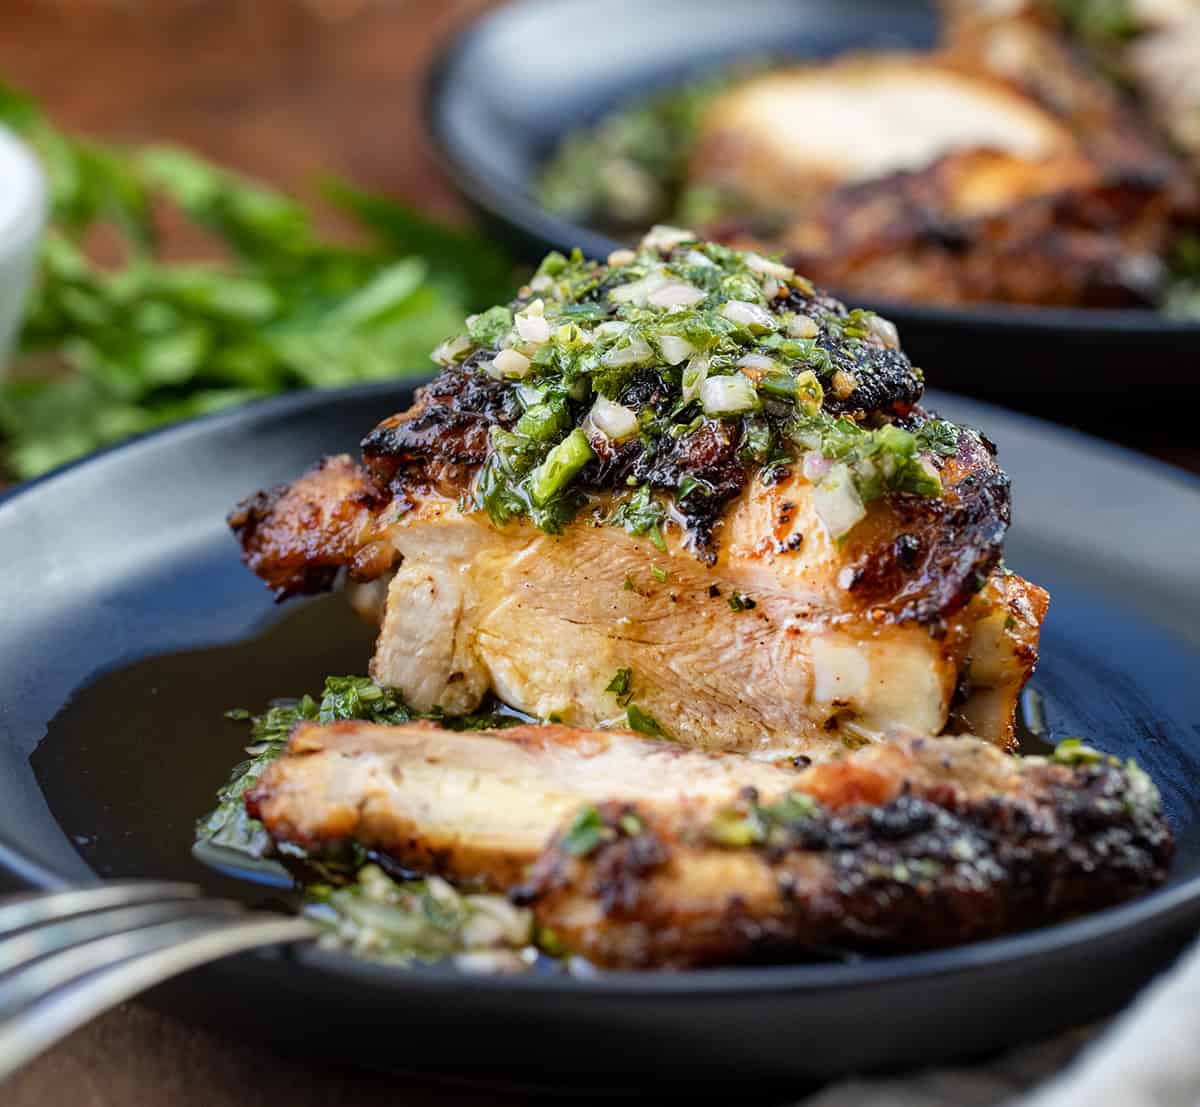 Piece of Chimichurri Chicken on a black plate cut into showing tender chicken thigh.